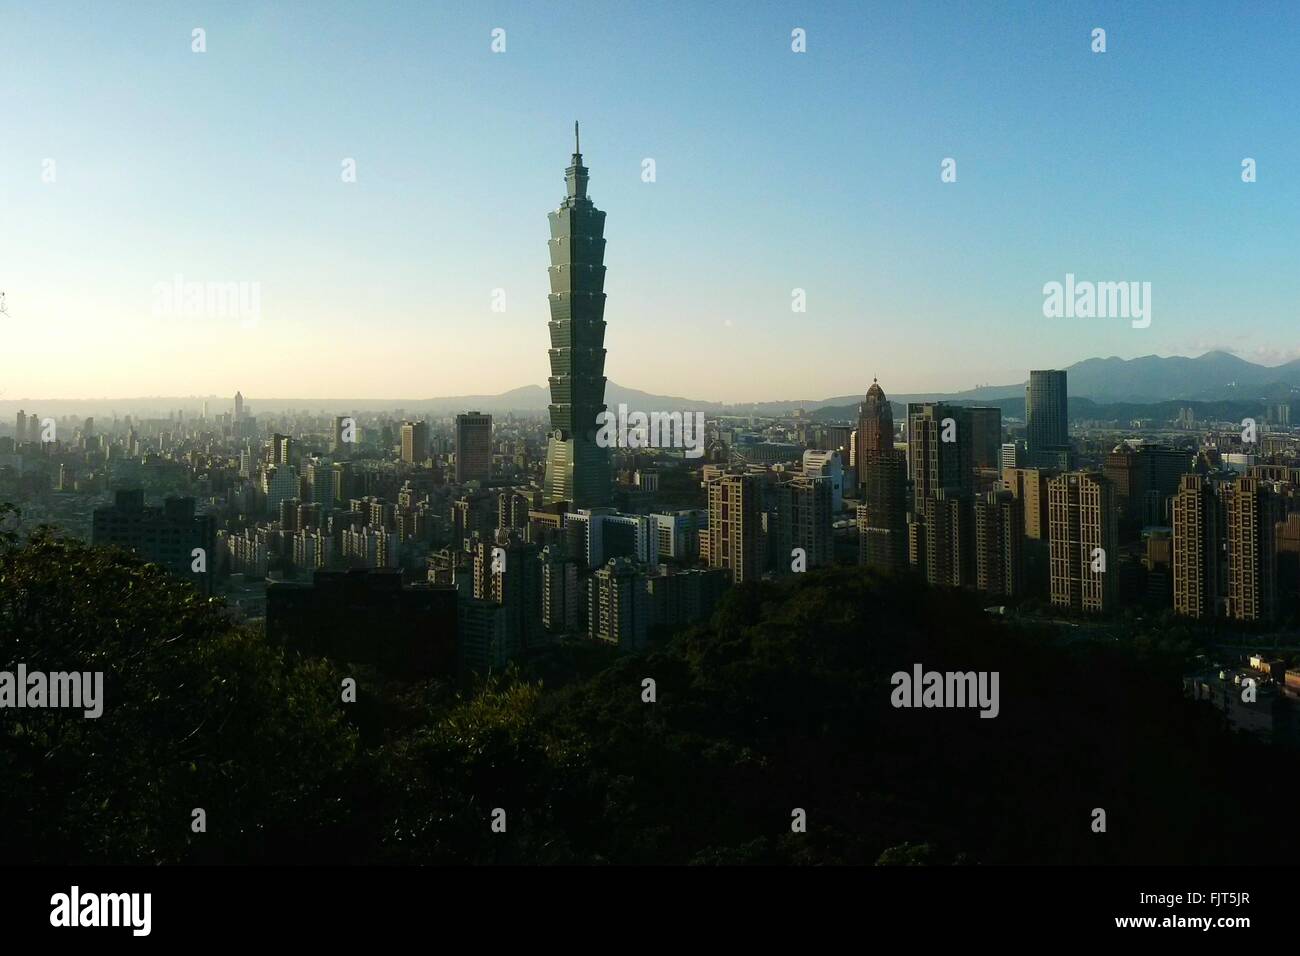 Taipei 101 And City Against Clear Sky Stock Photo